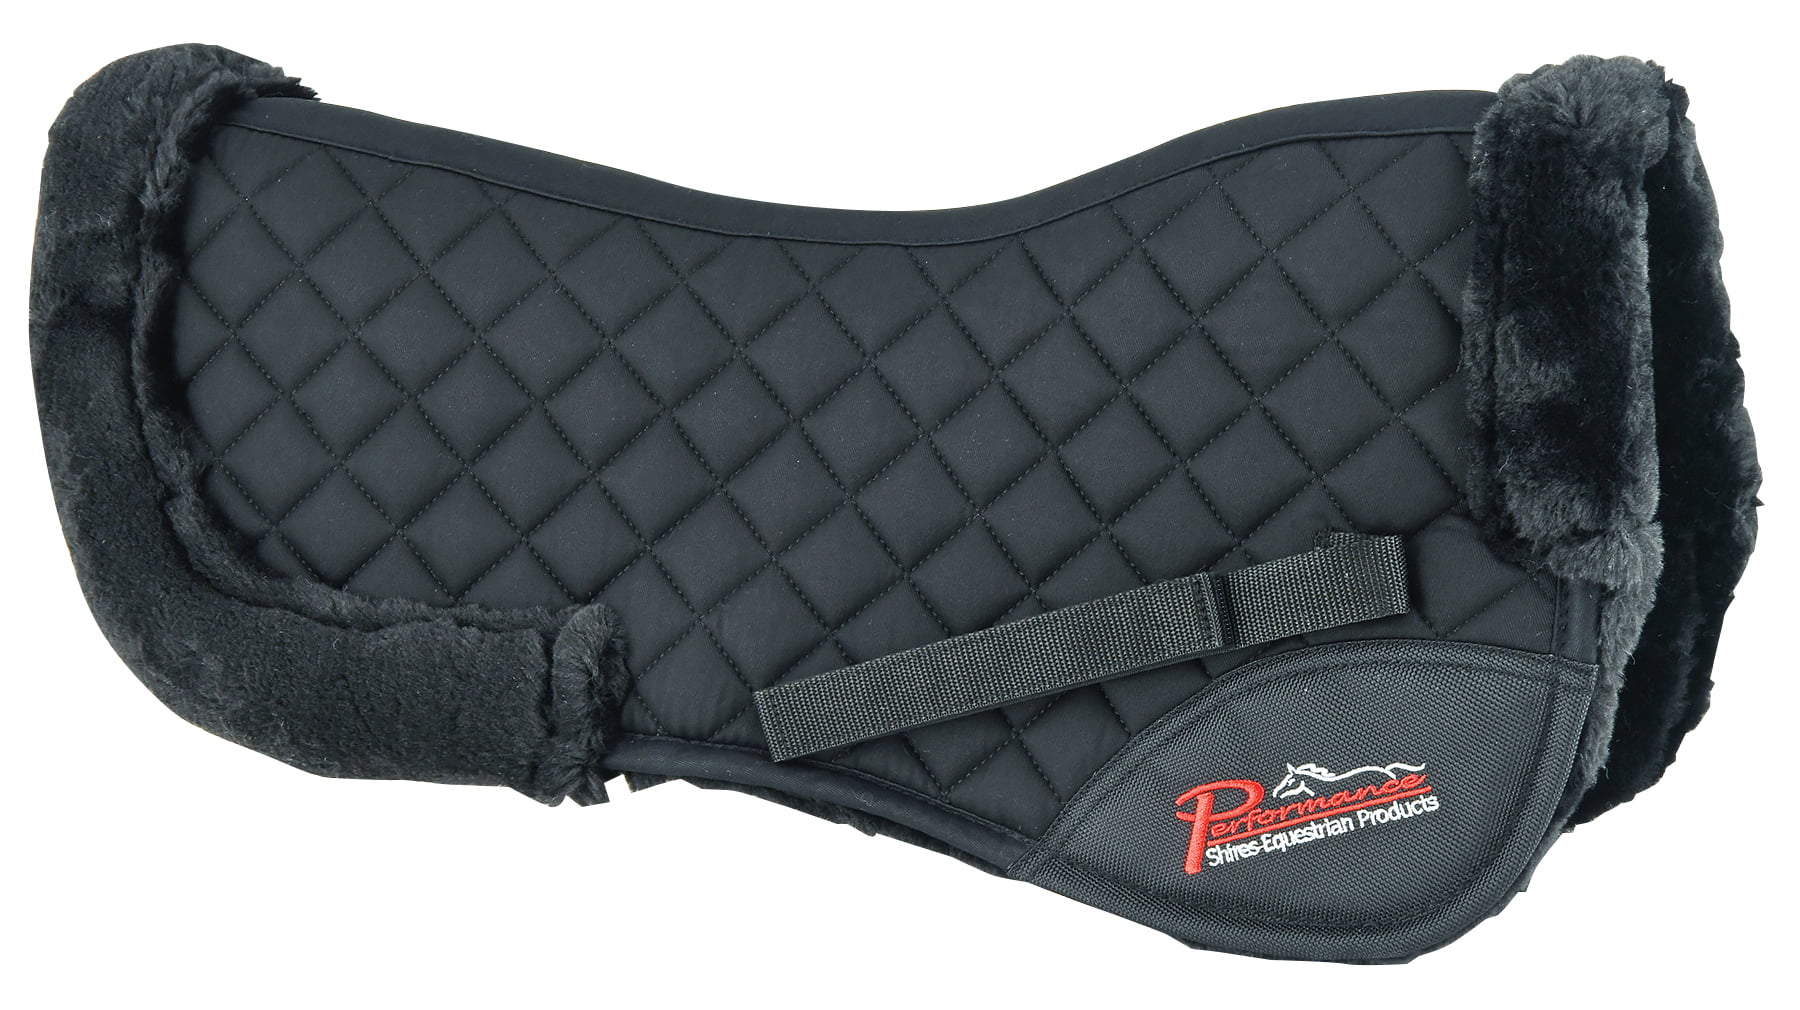 Shires Equestrian Supafleece Half Saddle Pad Protects Against Chafing 